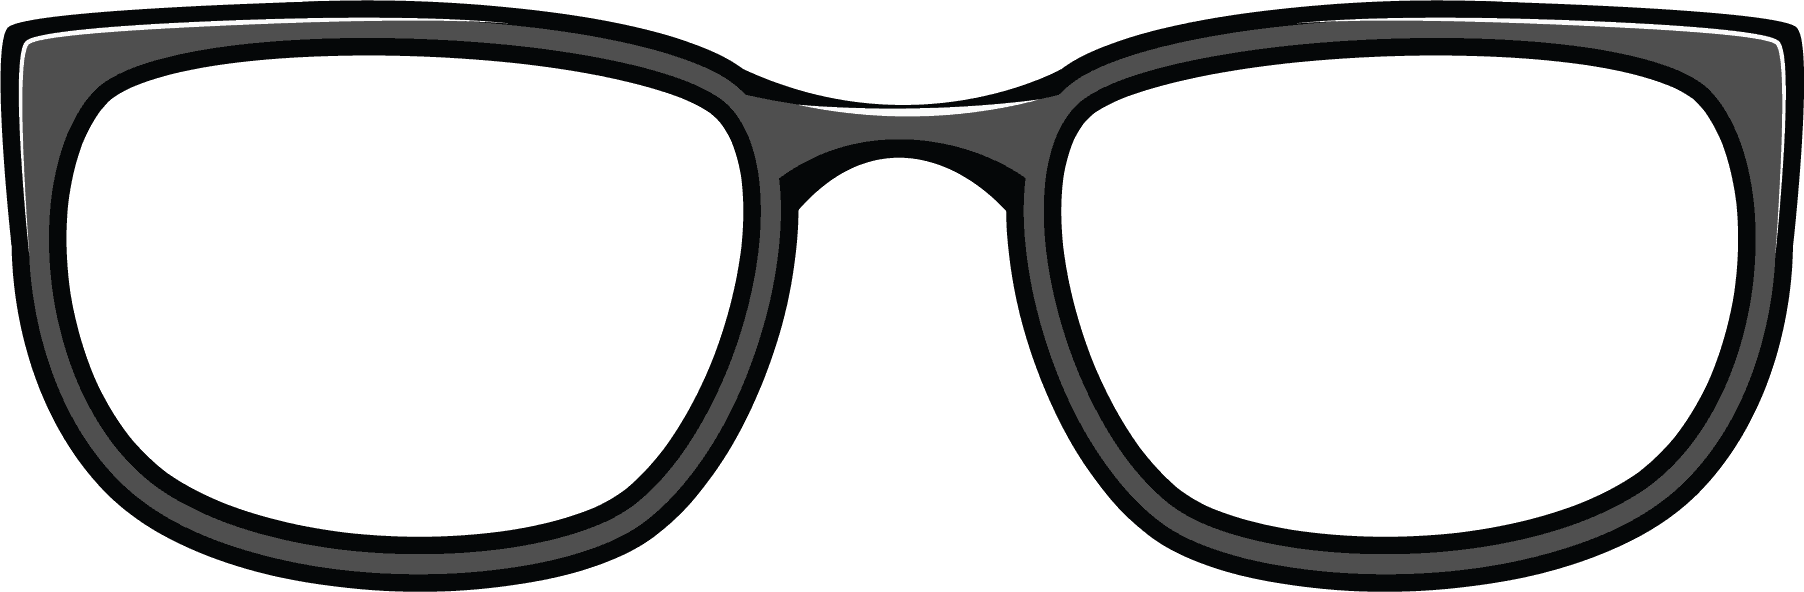 Round Glasses Clipart Free To Use Clip Art Resource - Eyeglasses Clip Art Png (1804x592)